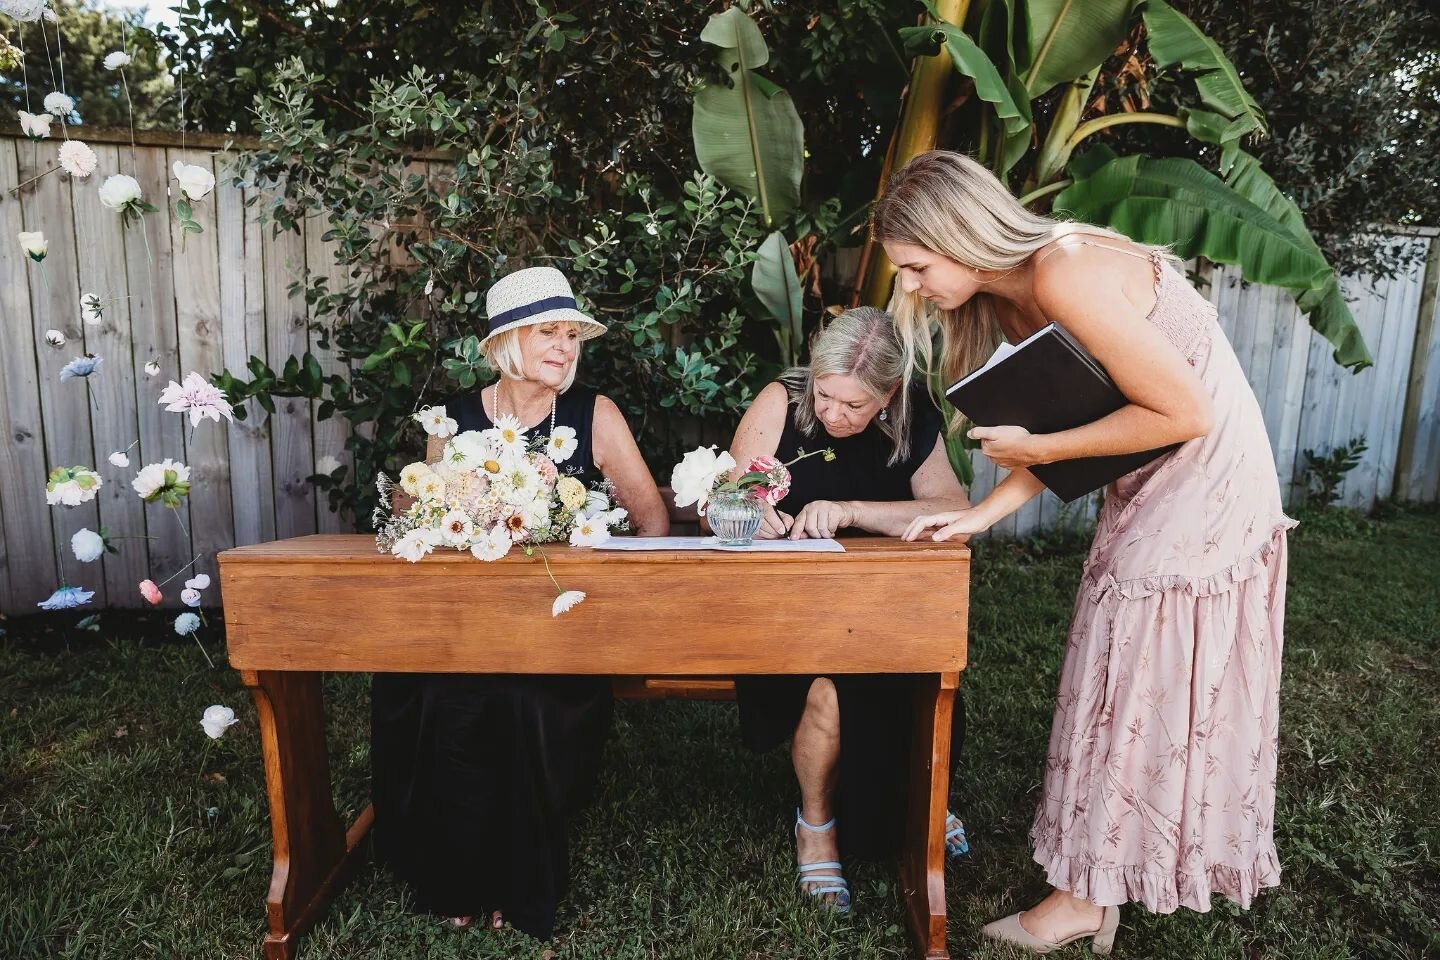 Signing Sarah and Simons paperwork under their banana tree in their own backyard (tropical oasis) in Matapihi.

This is as close to a tropical wedding as a celebrant of New Zealand is allowed to officiate. 

We are only allowed to marry couples withi